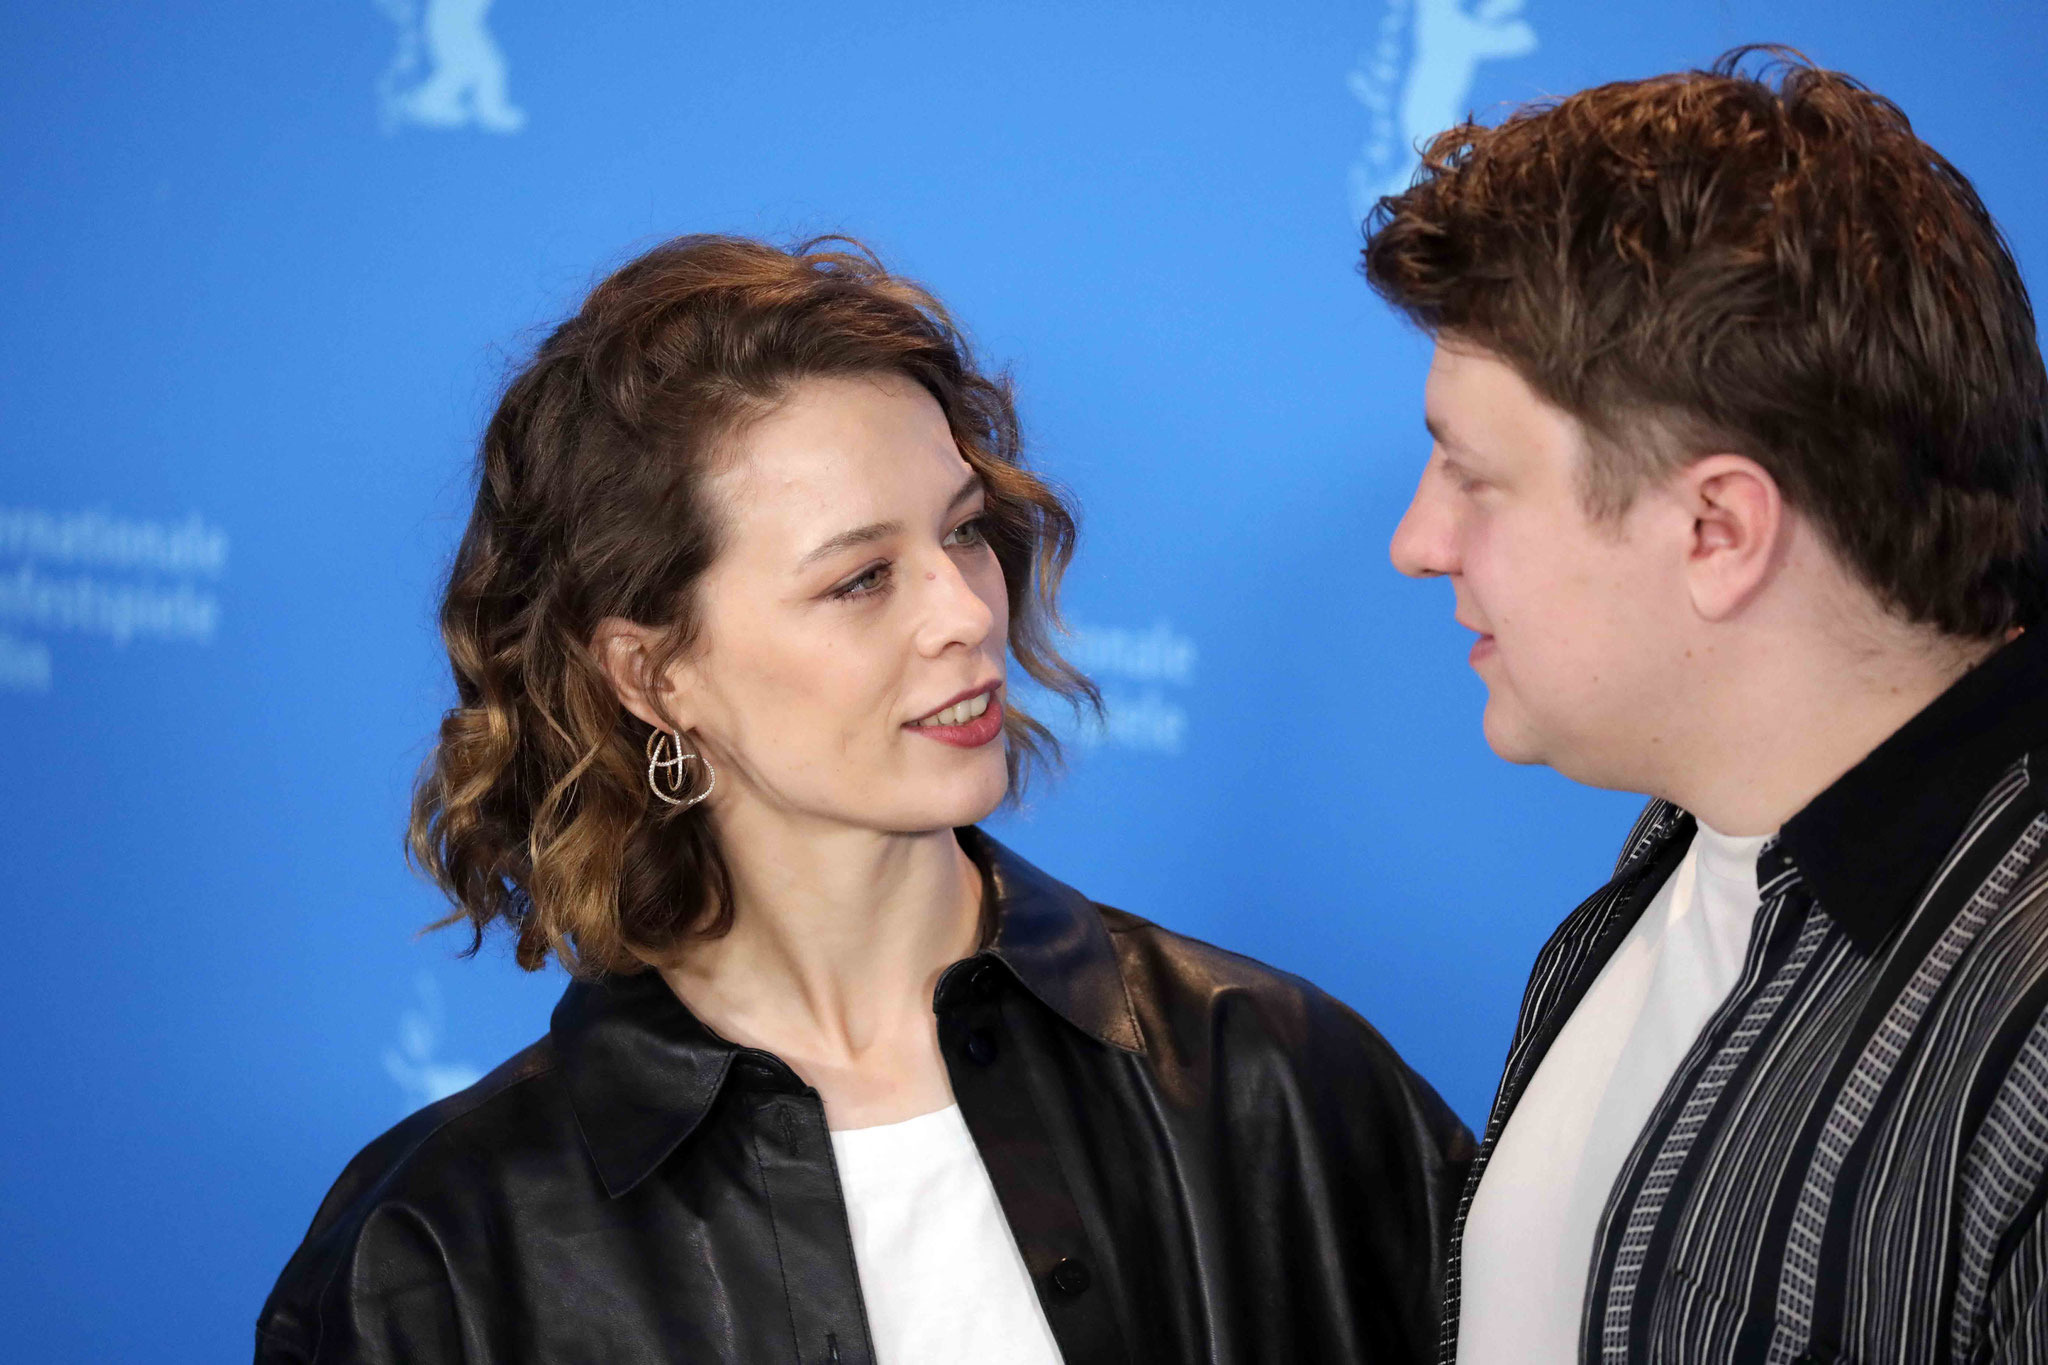 Paula Beer and Thomas Schubert during the photo call for the film "Roter Himmel".